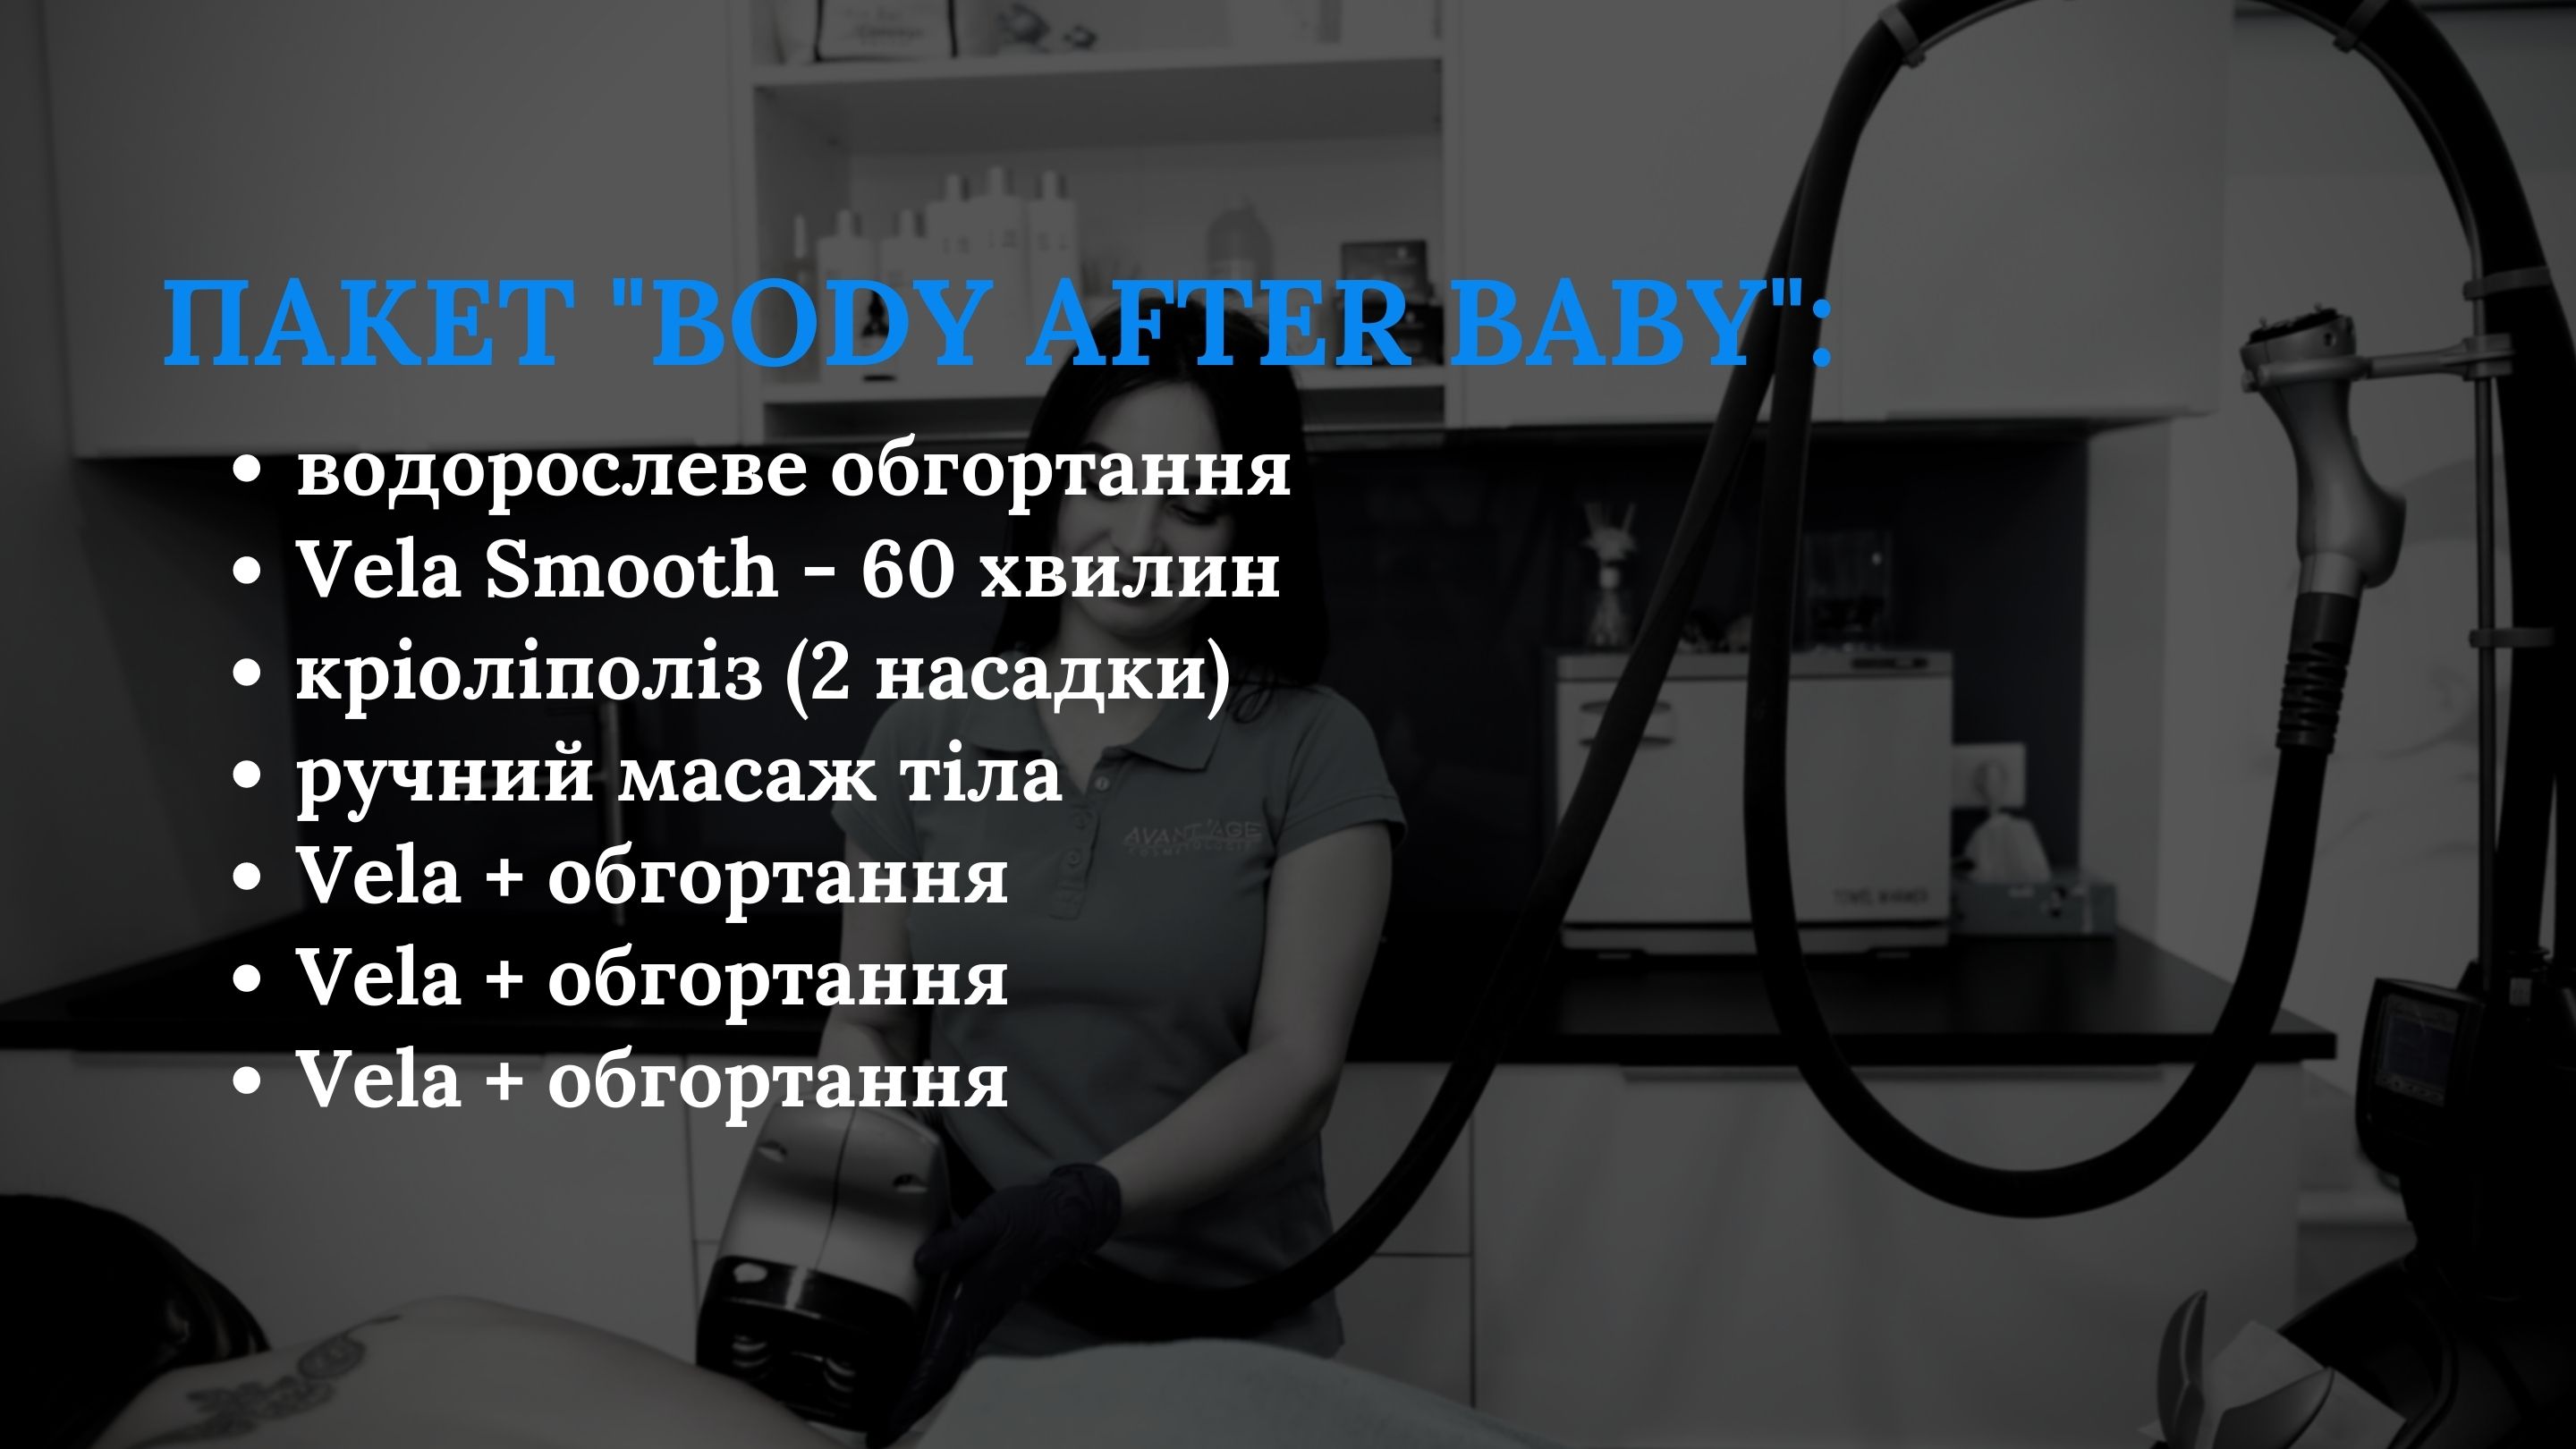 Body after baby